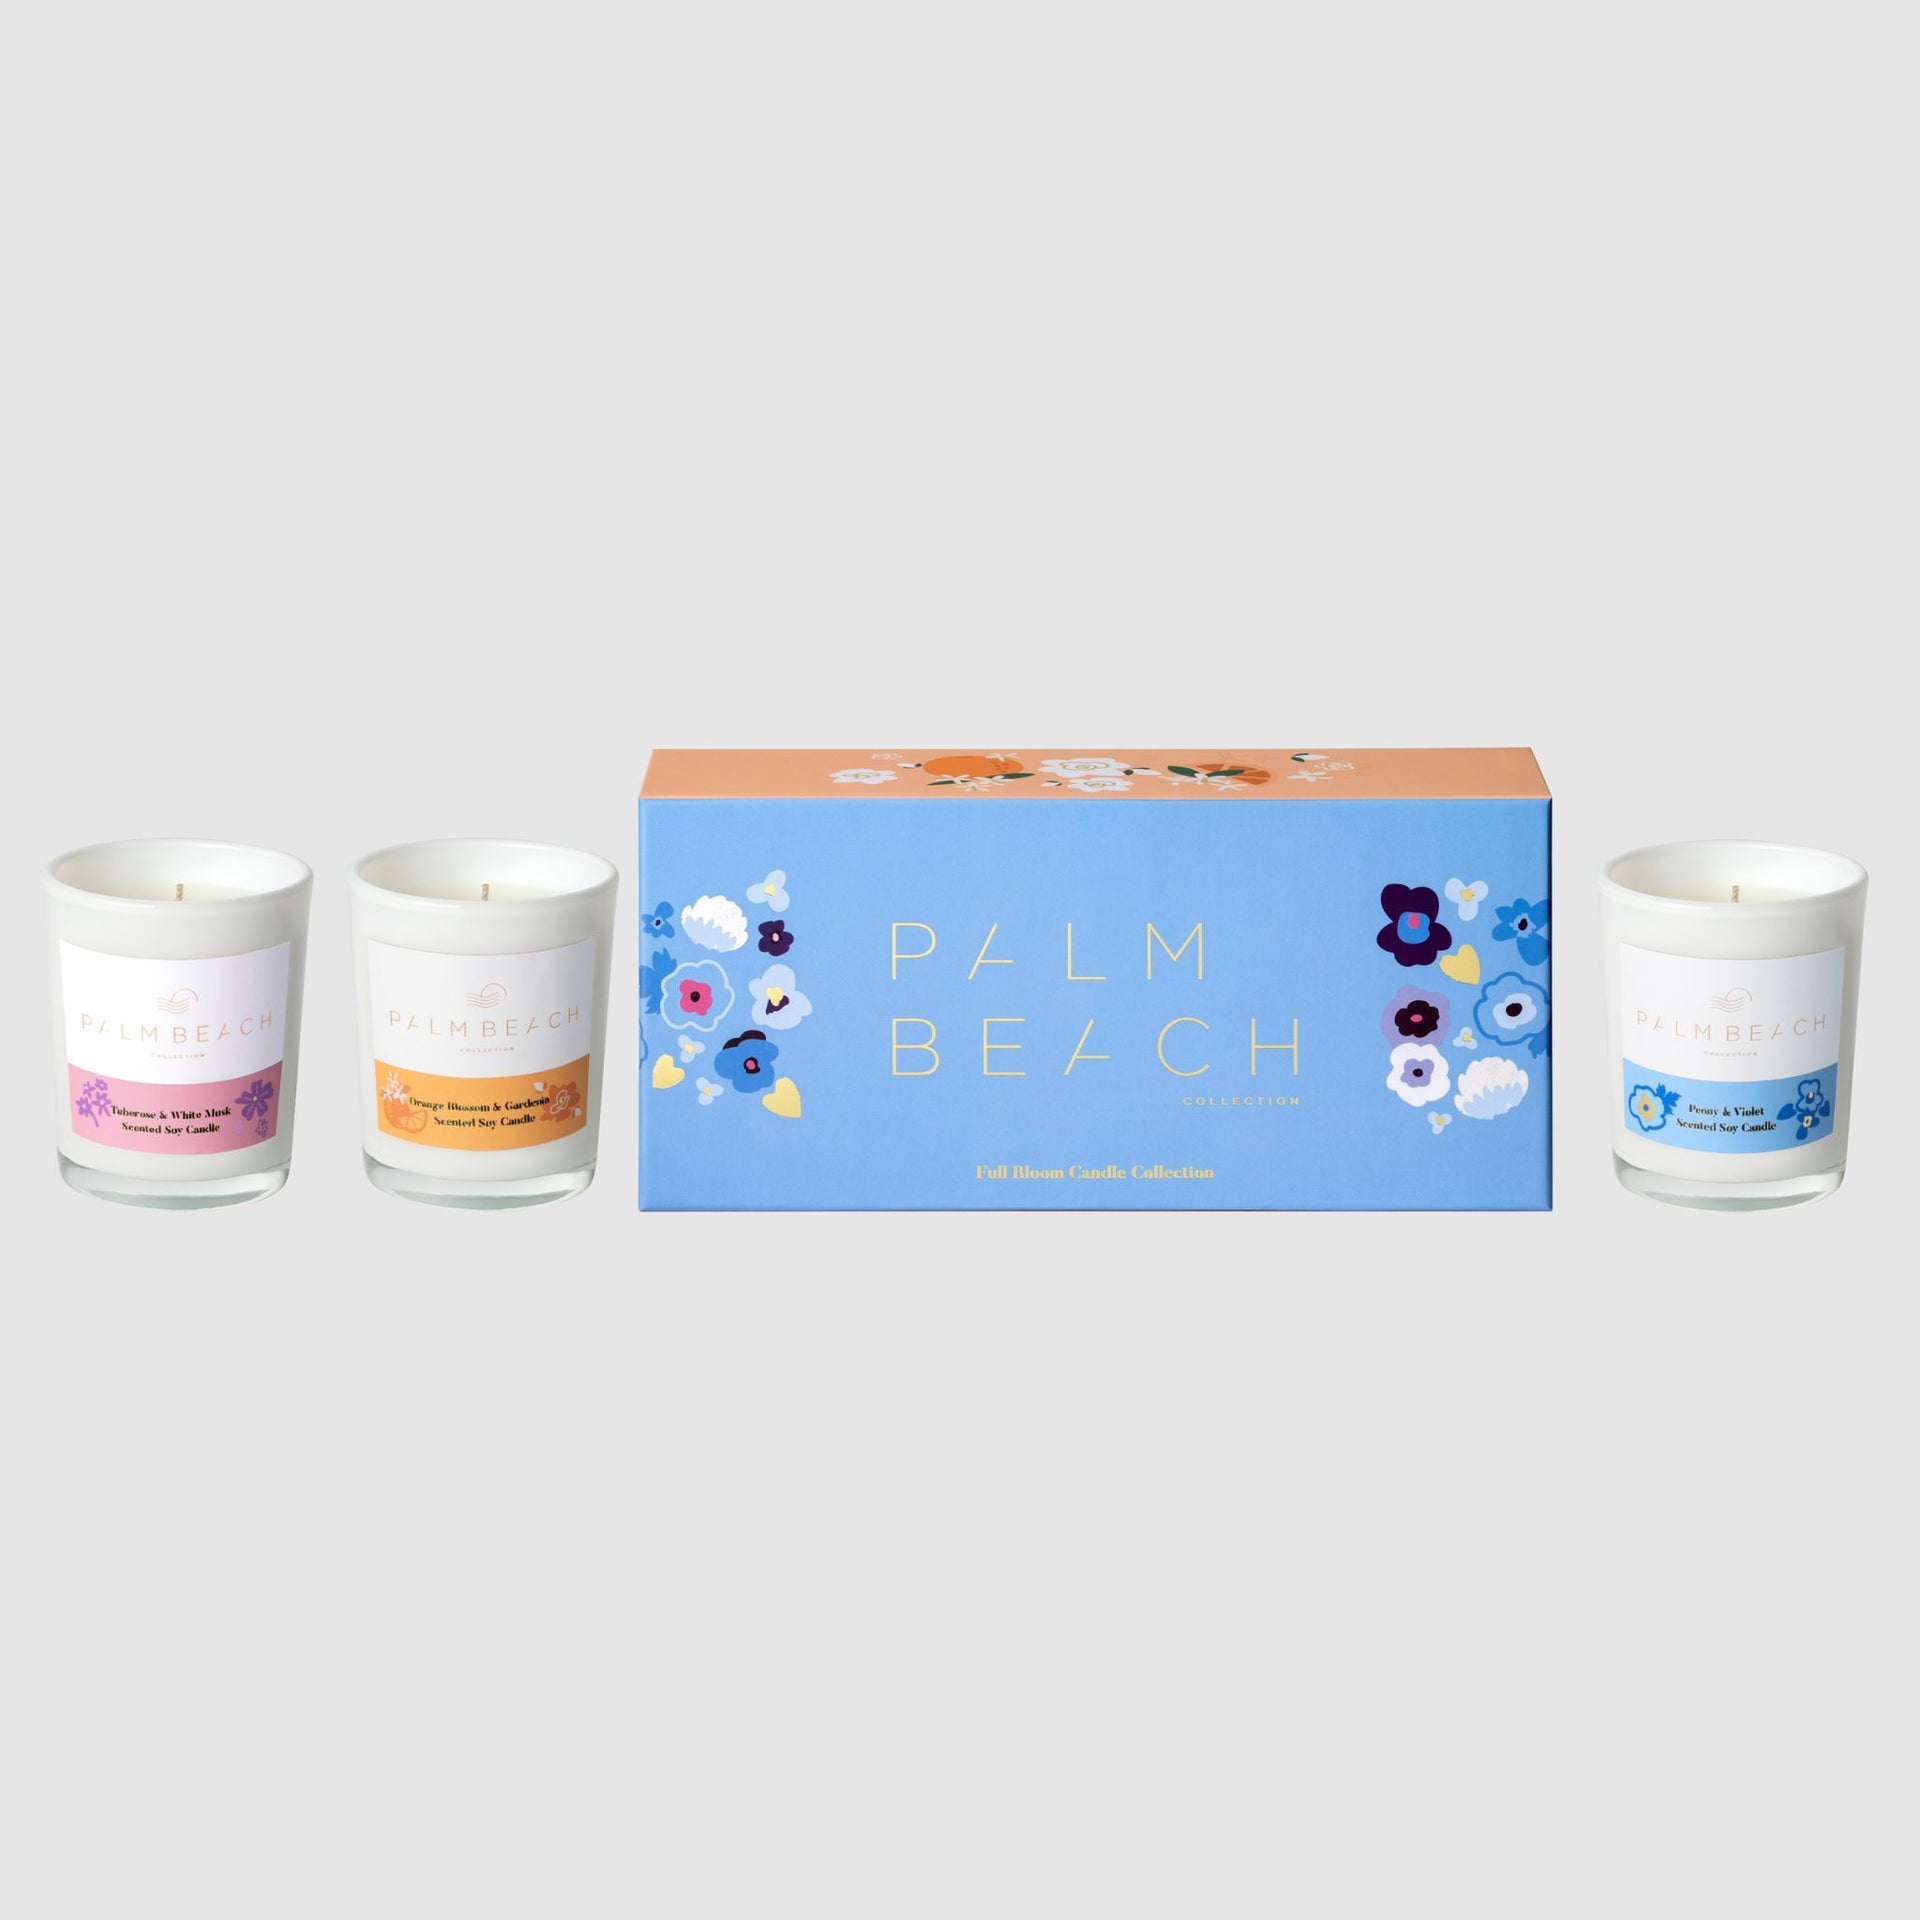 Full Bloom Candle Collection